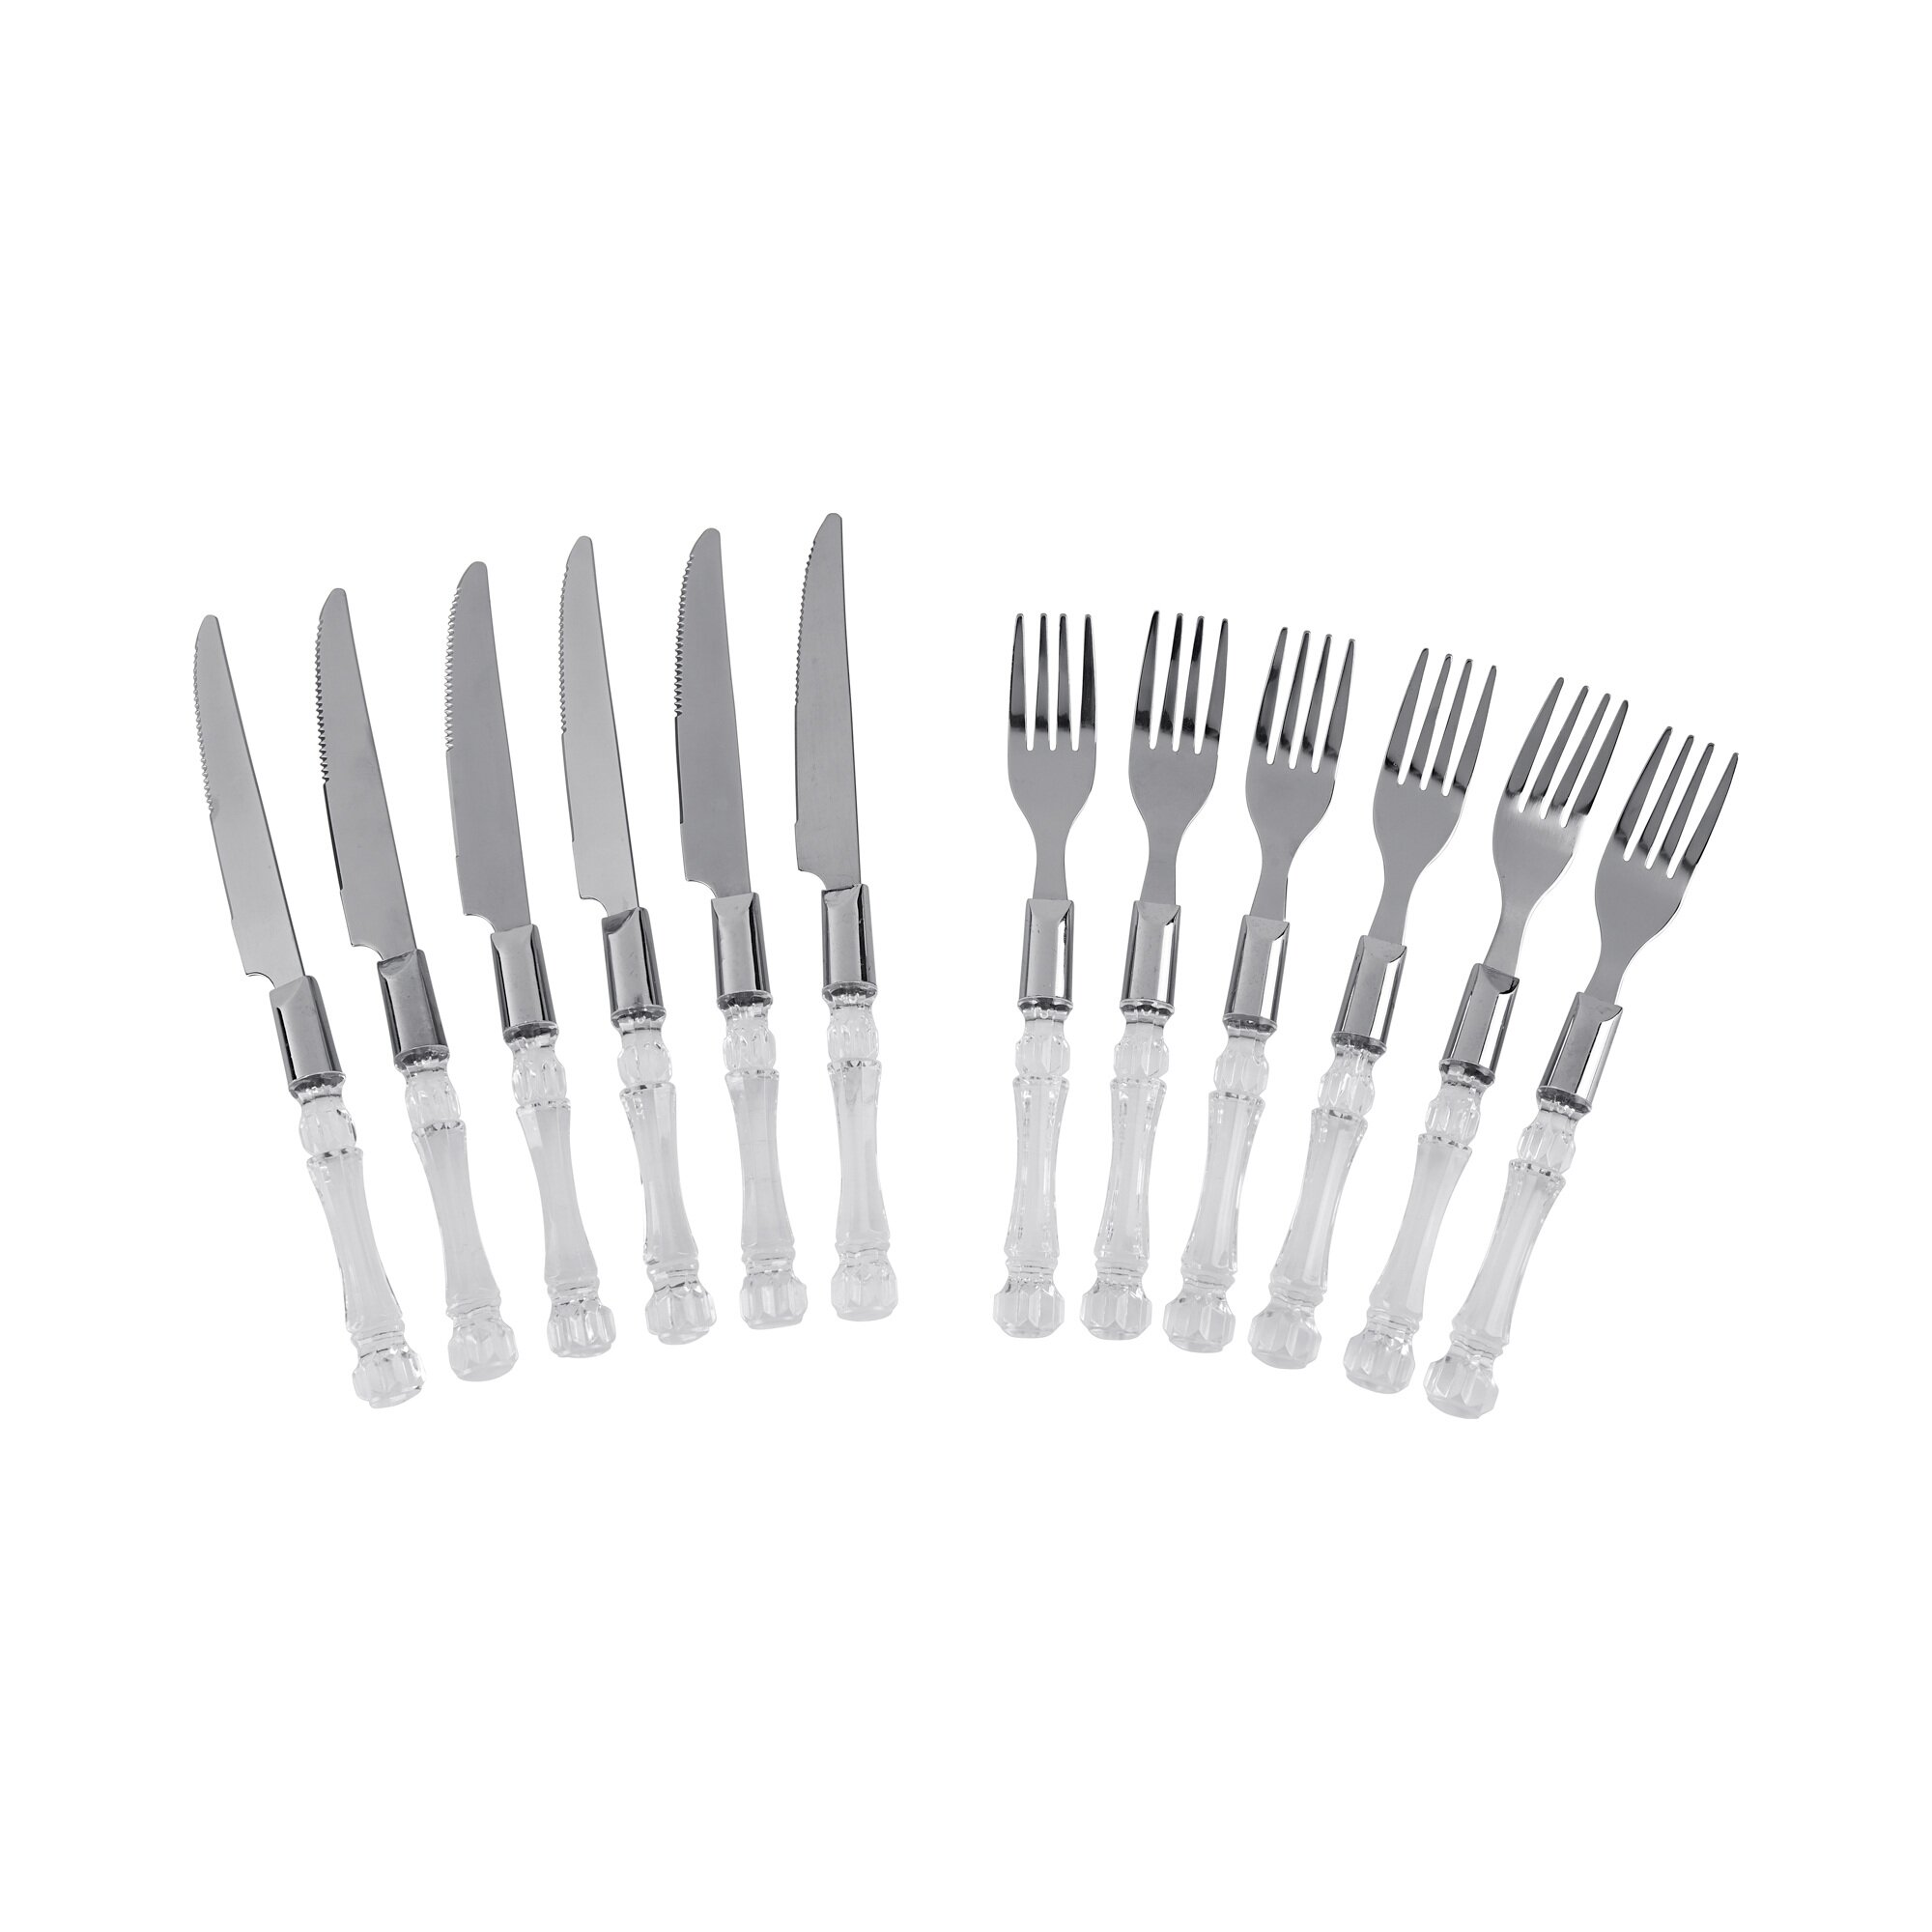 Image of Besteck-Set "Classic", 12 Teile